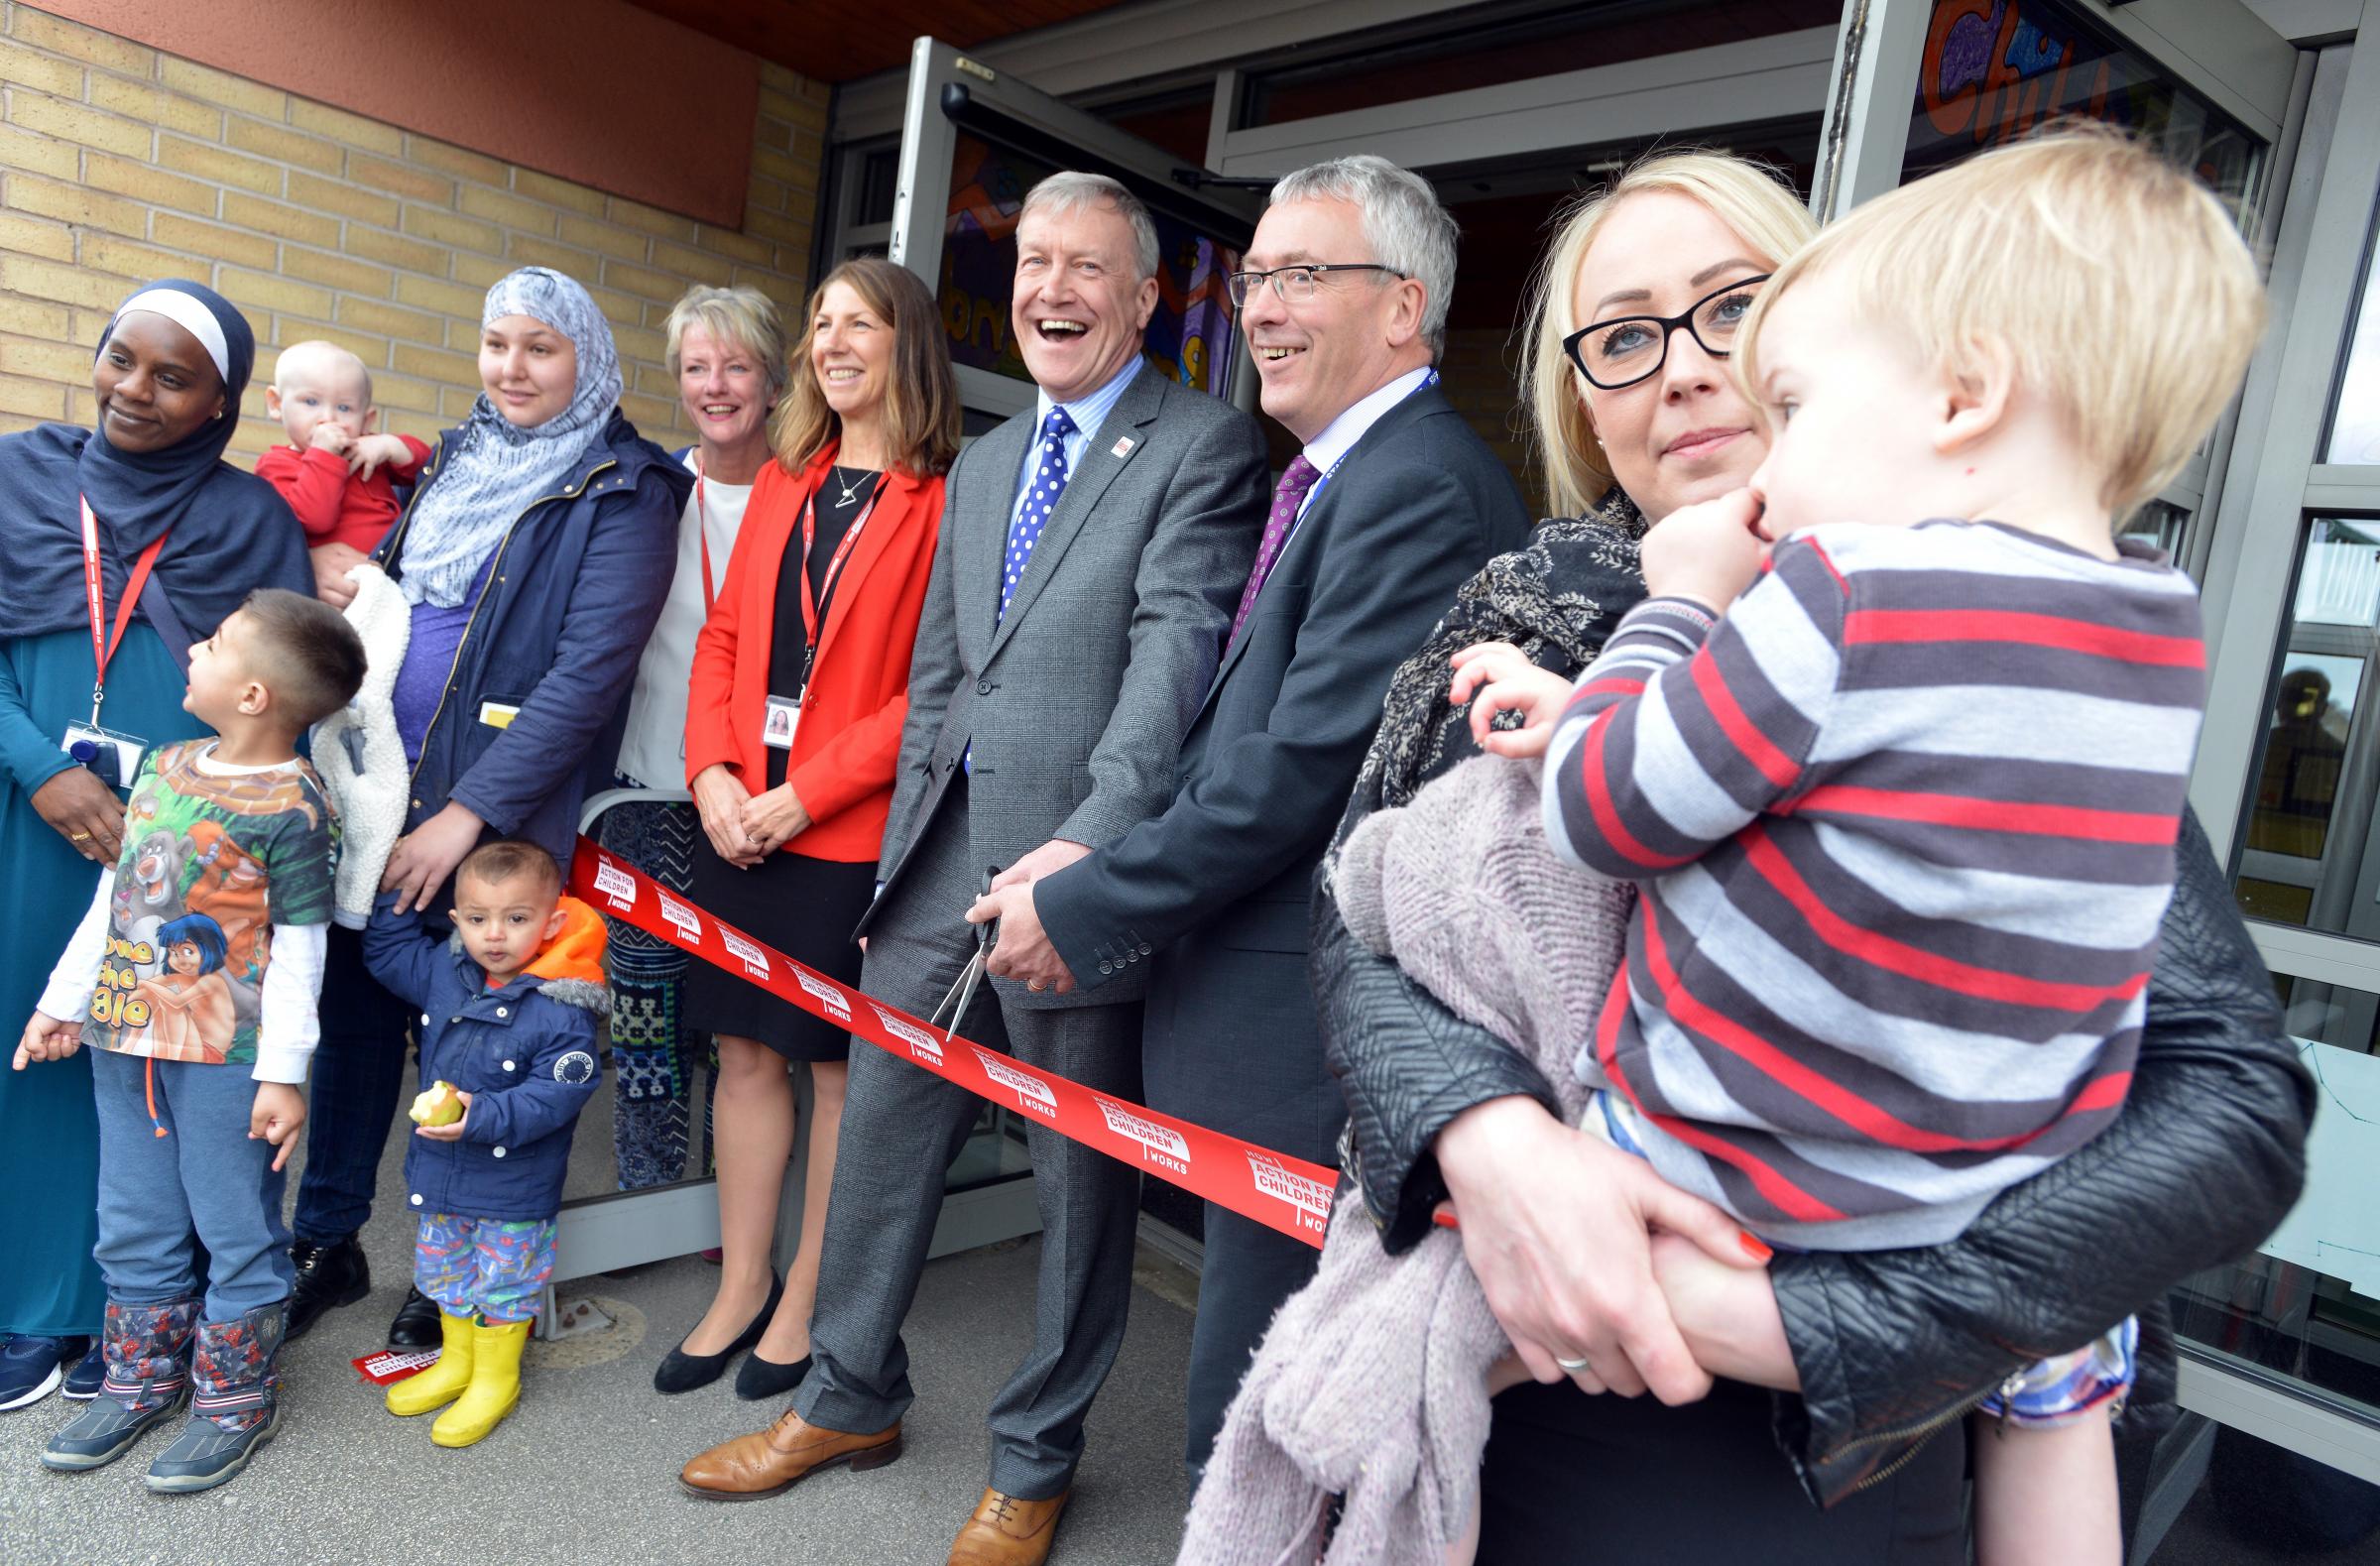 New children's centre 'cluster' officially opened in East Bradford ... - Bradford Telegraph and Argus